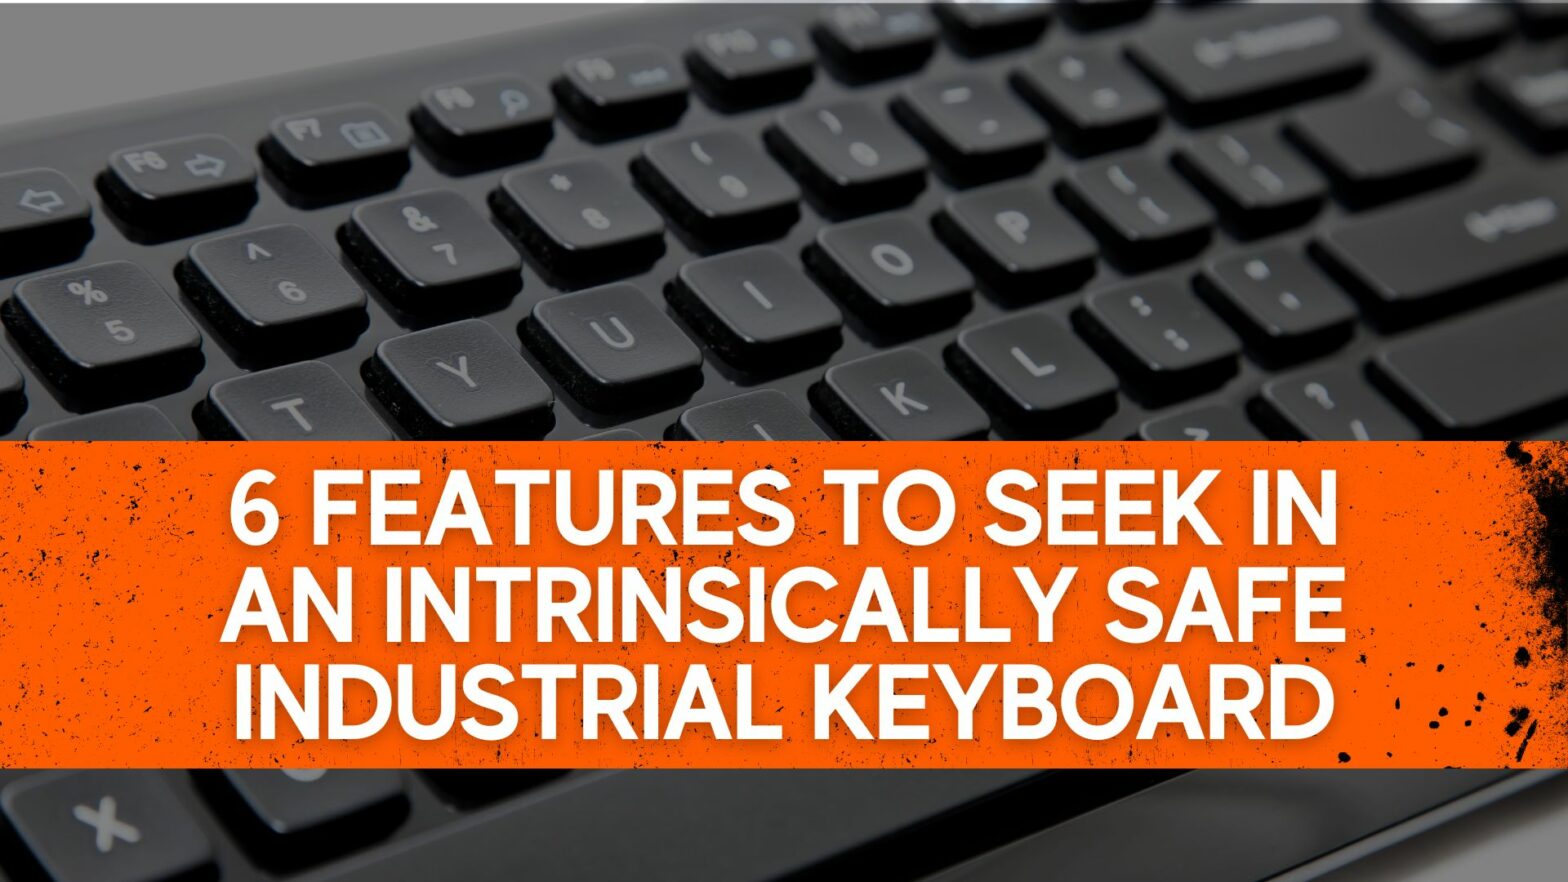 6 Features to Seek in an Intrinsically Safe Industrial Keyboard